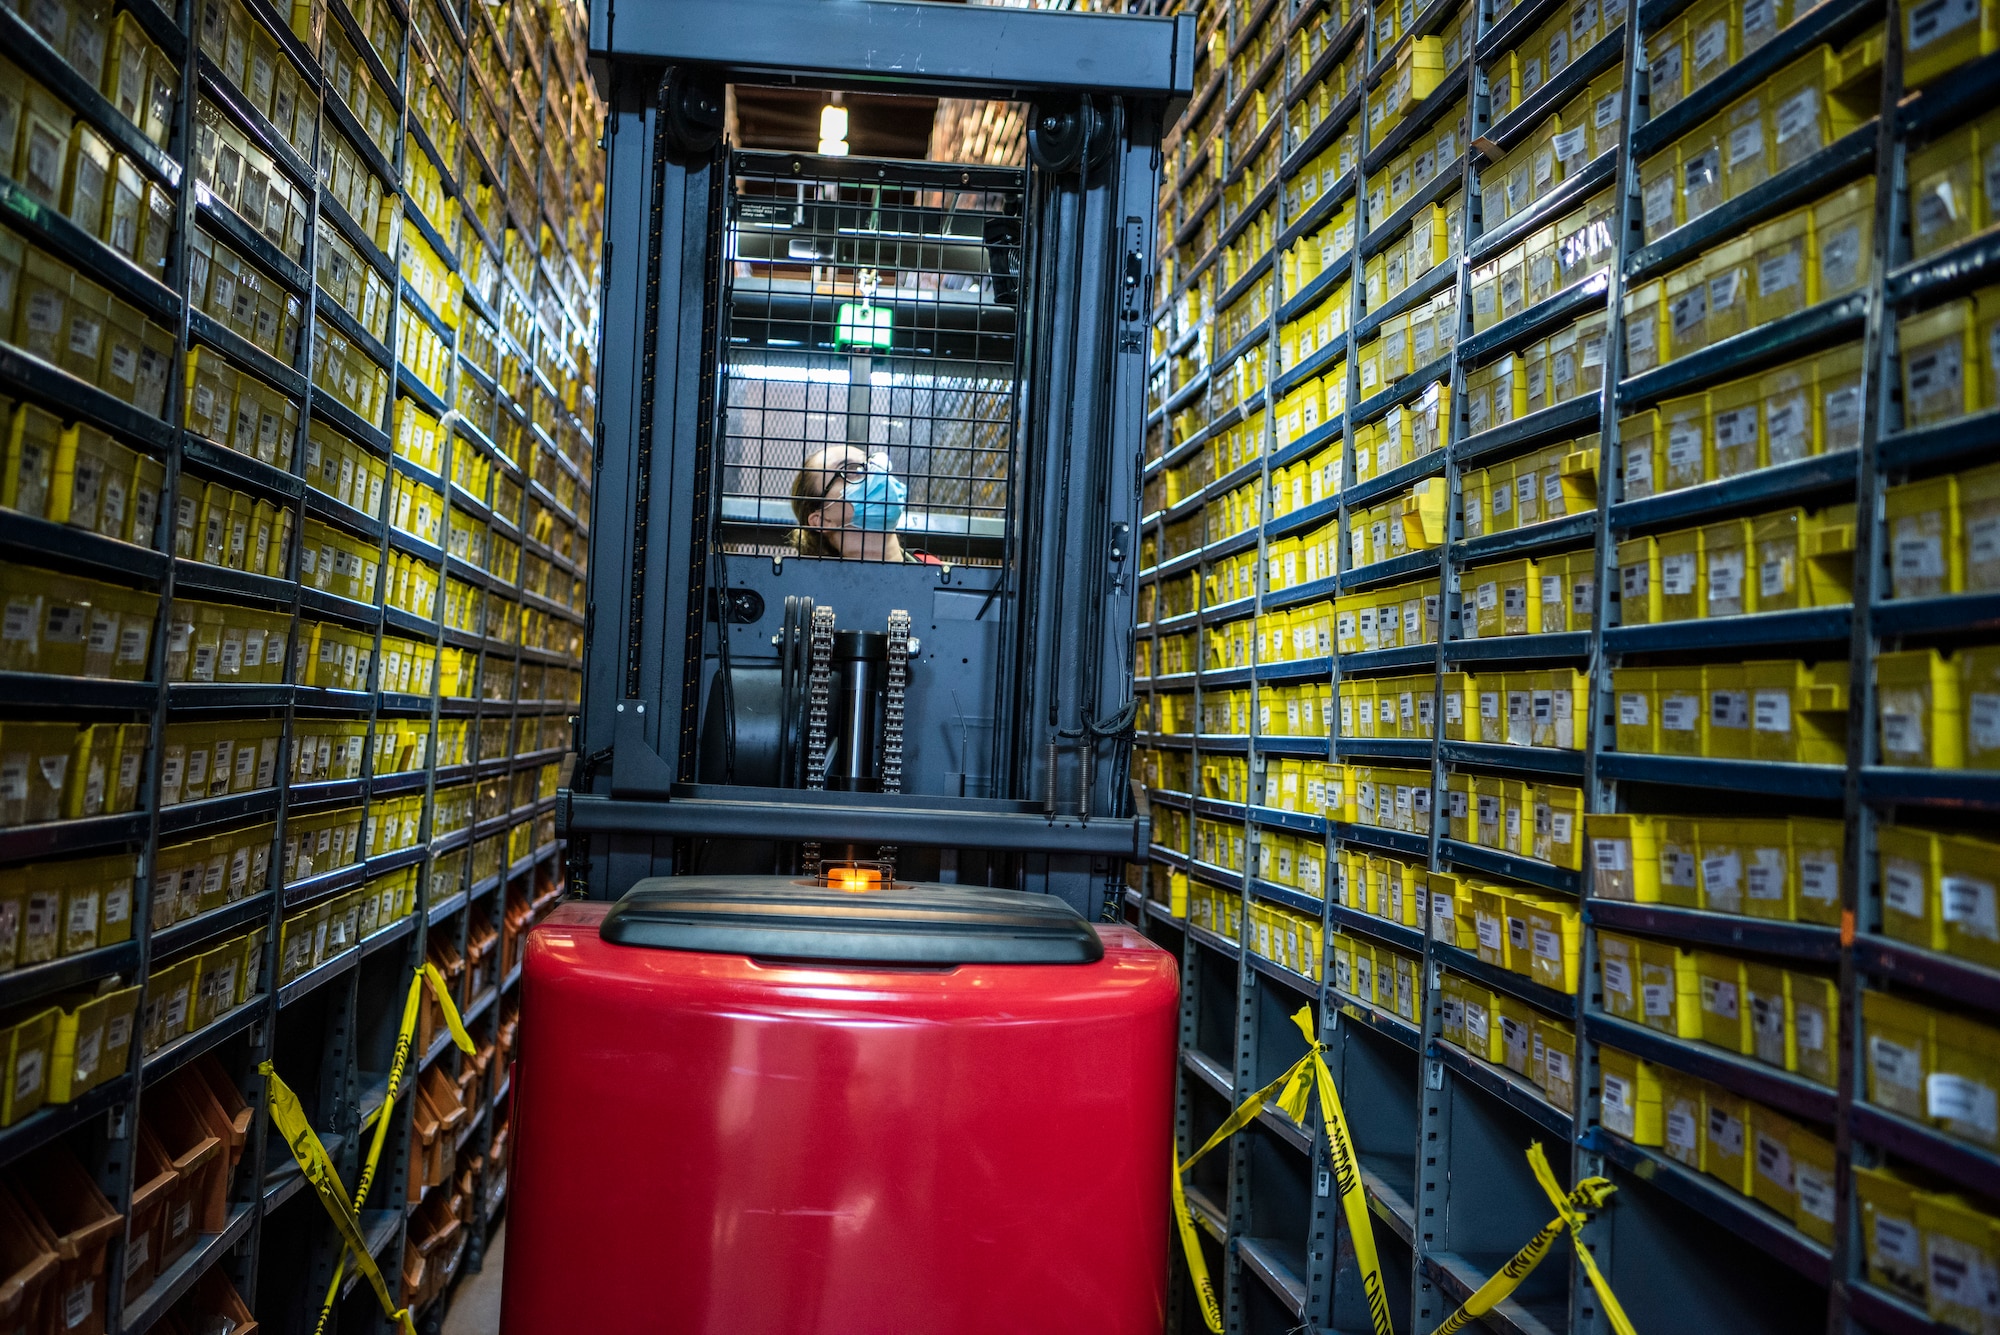 A female Airman drives a forklift through narrow shelves of small parts.